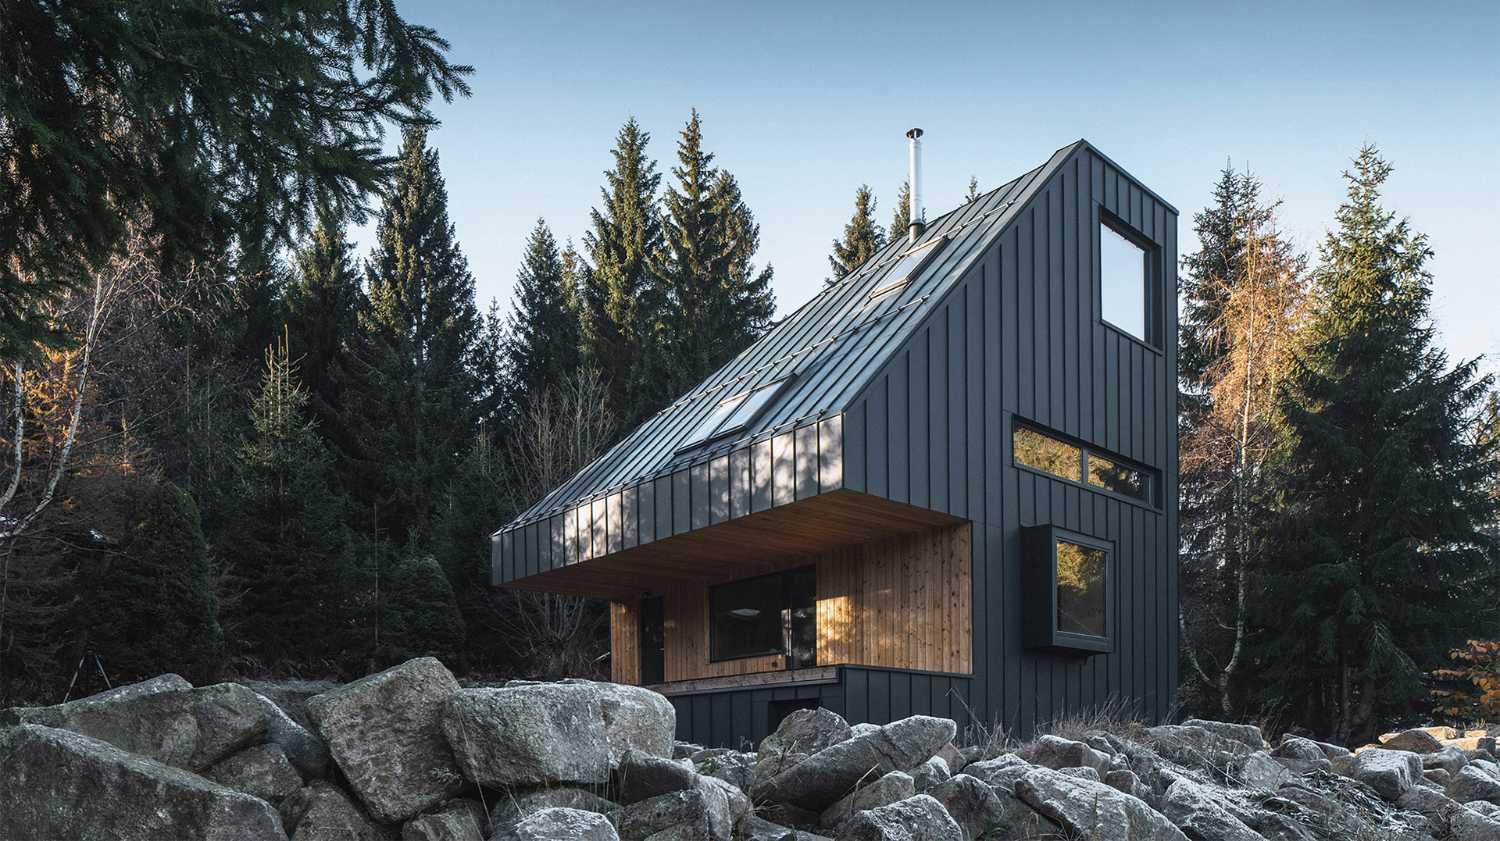 Vacation home in Czech Republic. Shades of gray echo the local color